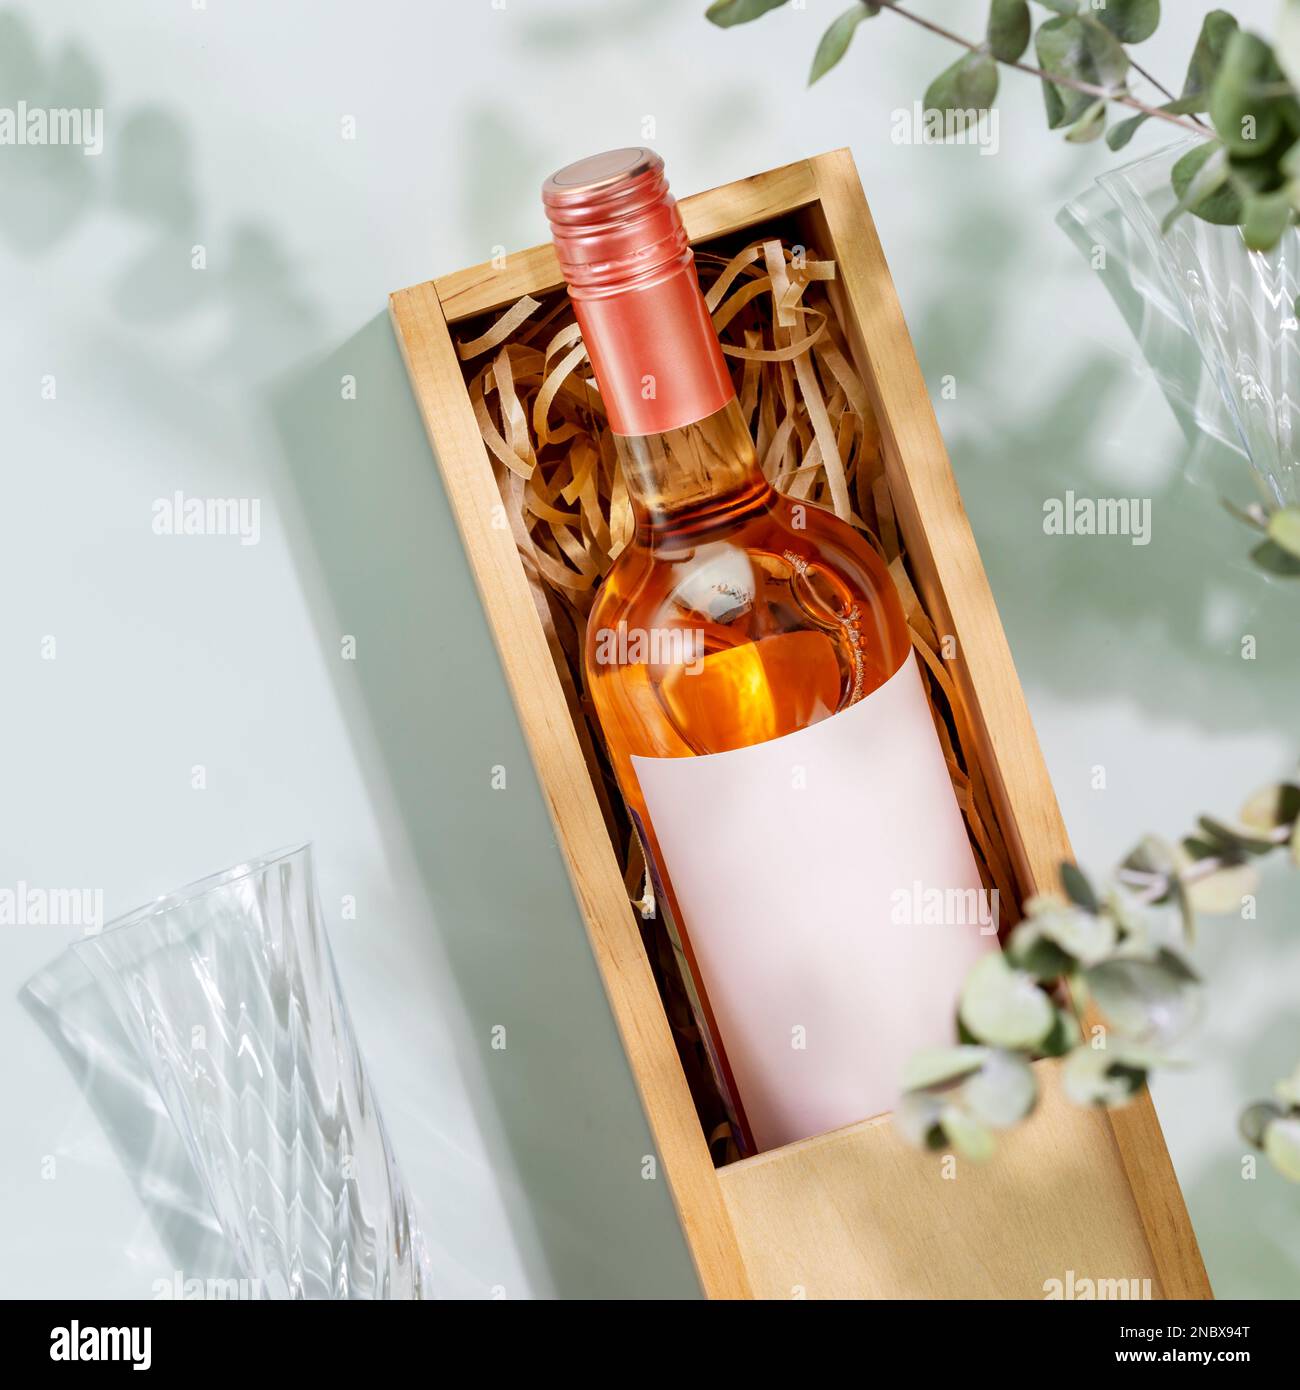 Rose wine. Bottle of pink wine with glasses on blue background with eucalyptus green leaves and shadows. Summer romantic still life with bottle of low Stock Photo